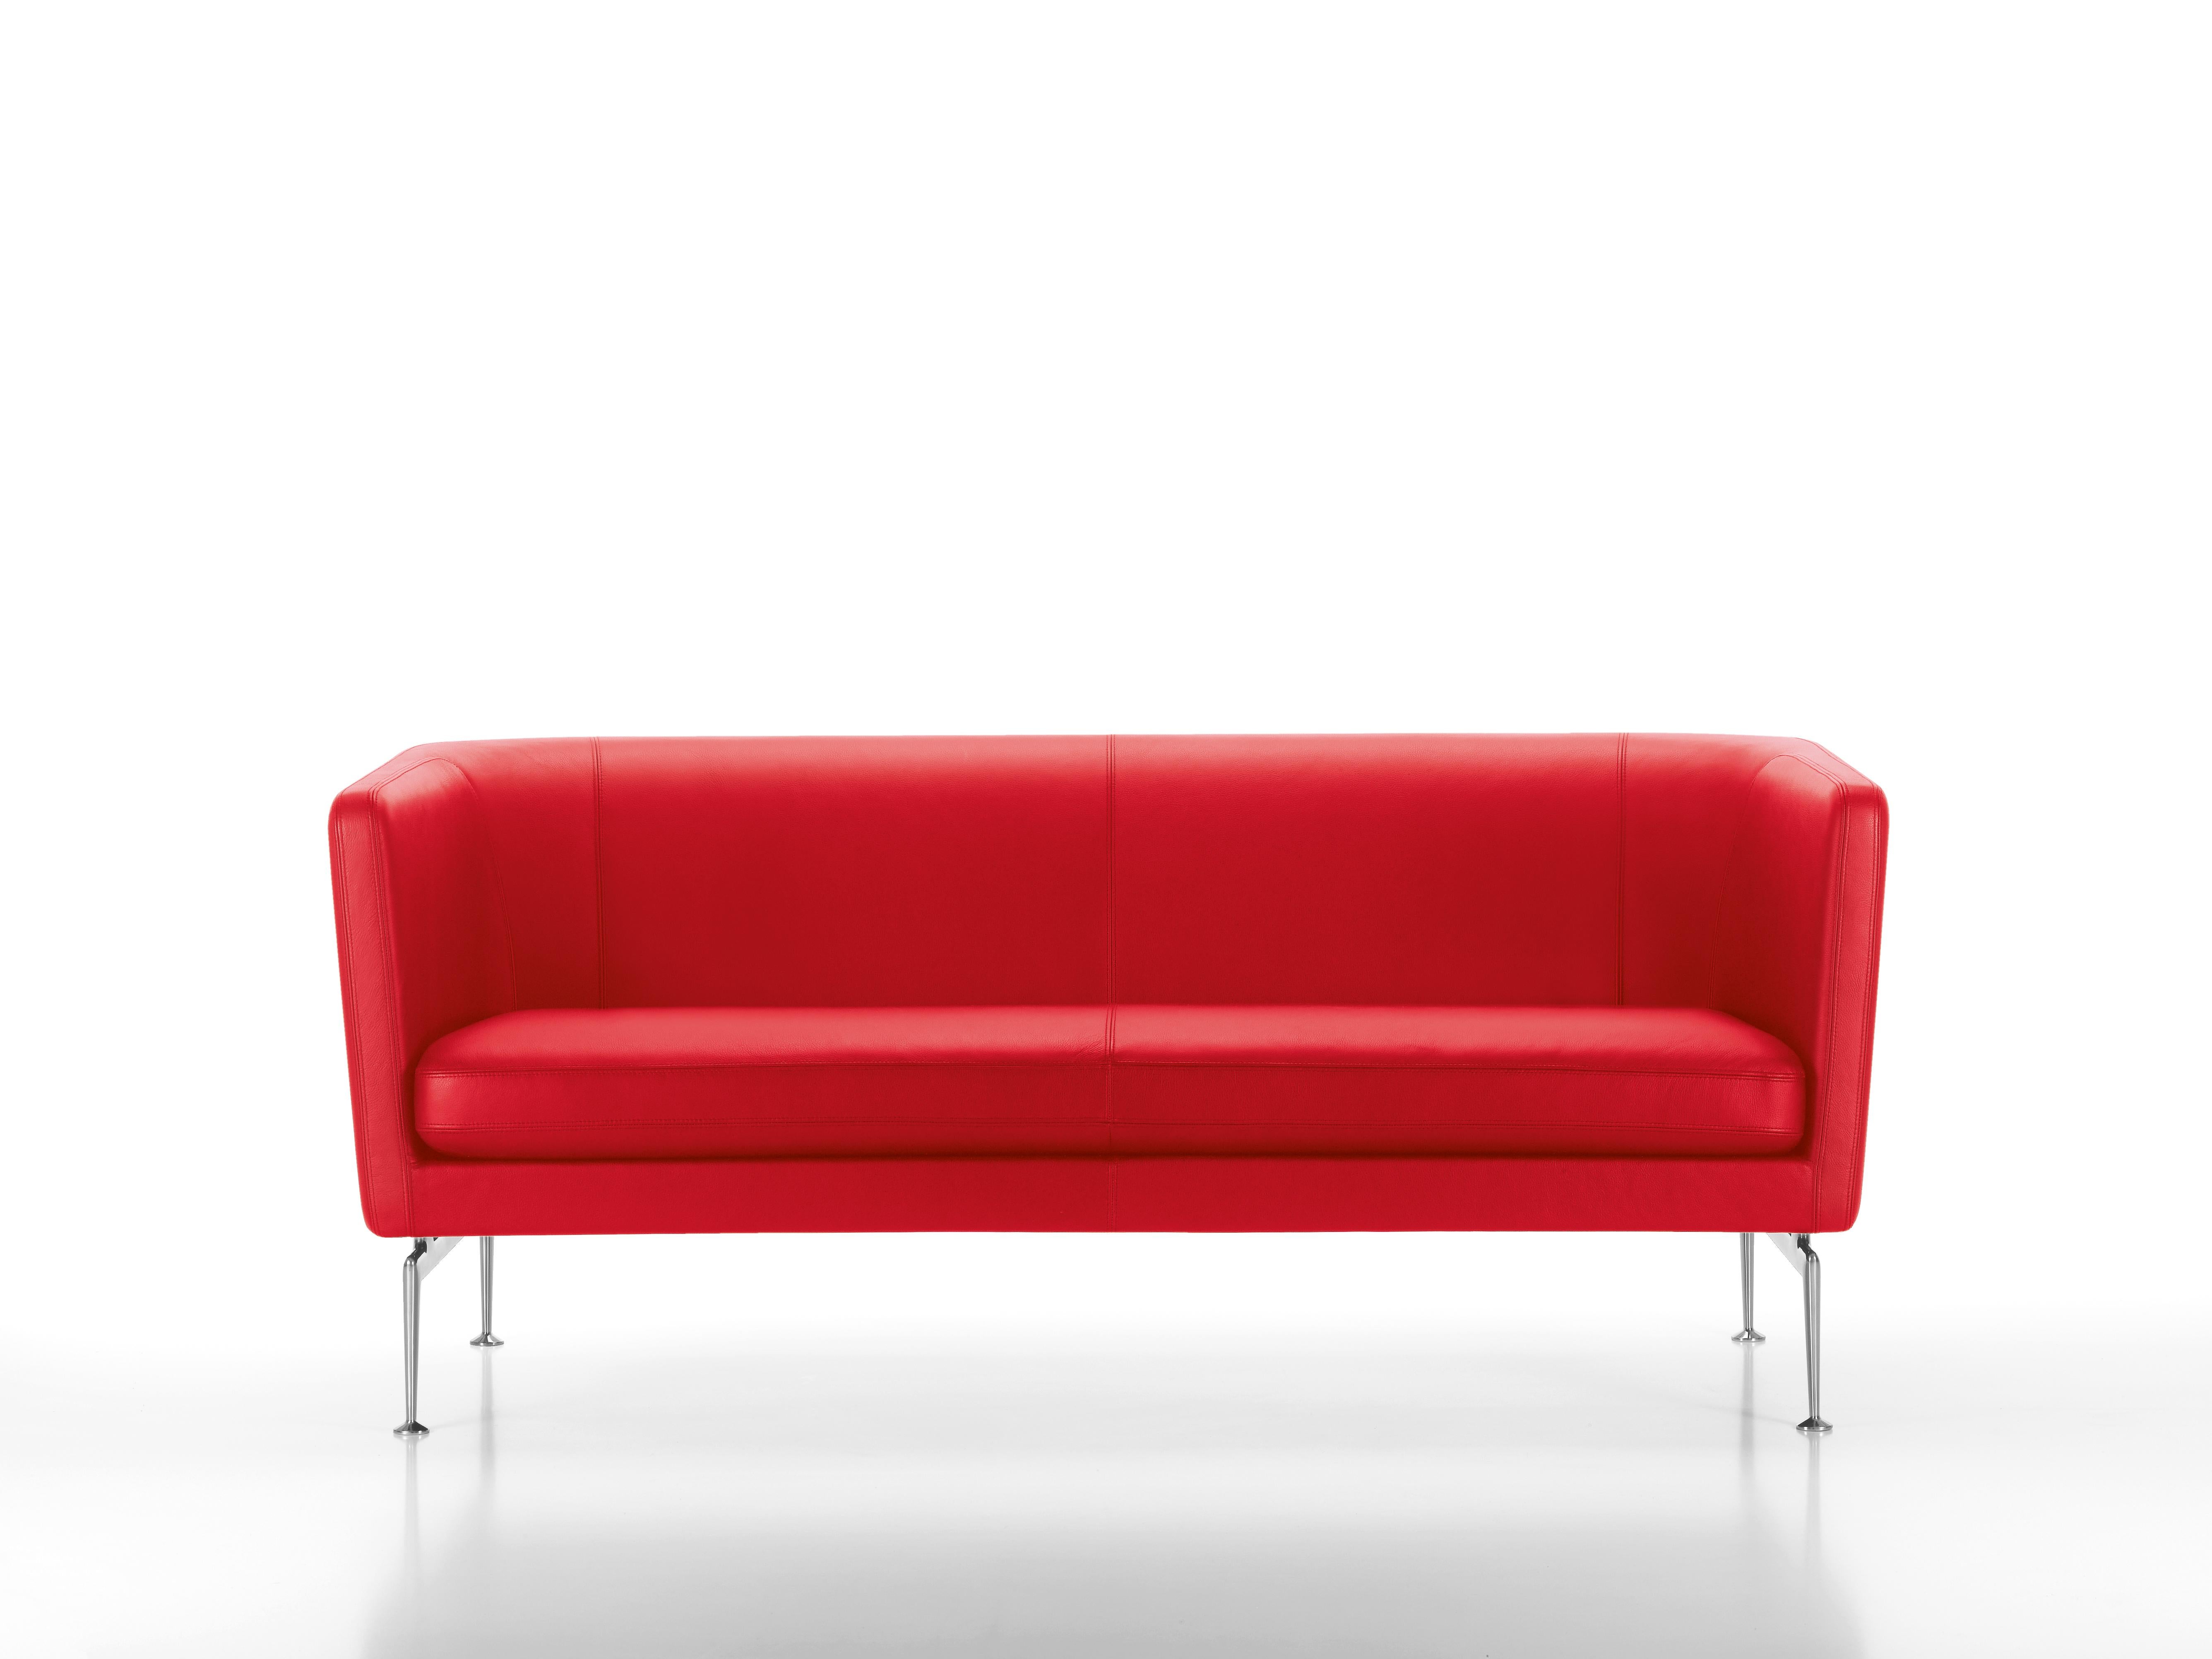 These items are currently only available in the United States.

The Suita Club sofa was developed for use in offices, waiting areas and lobbies. The high-quality construction, materials and workmanship satisfy the especially demanding conditions of